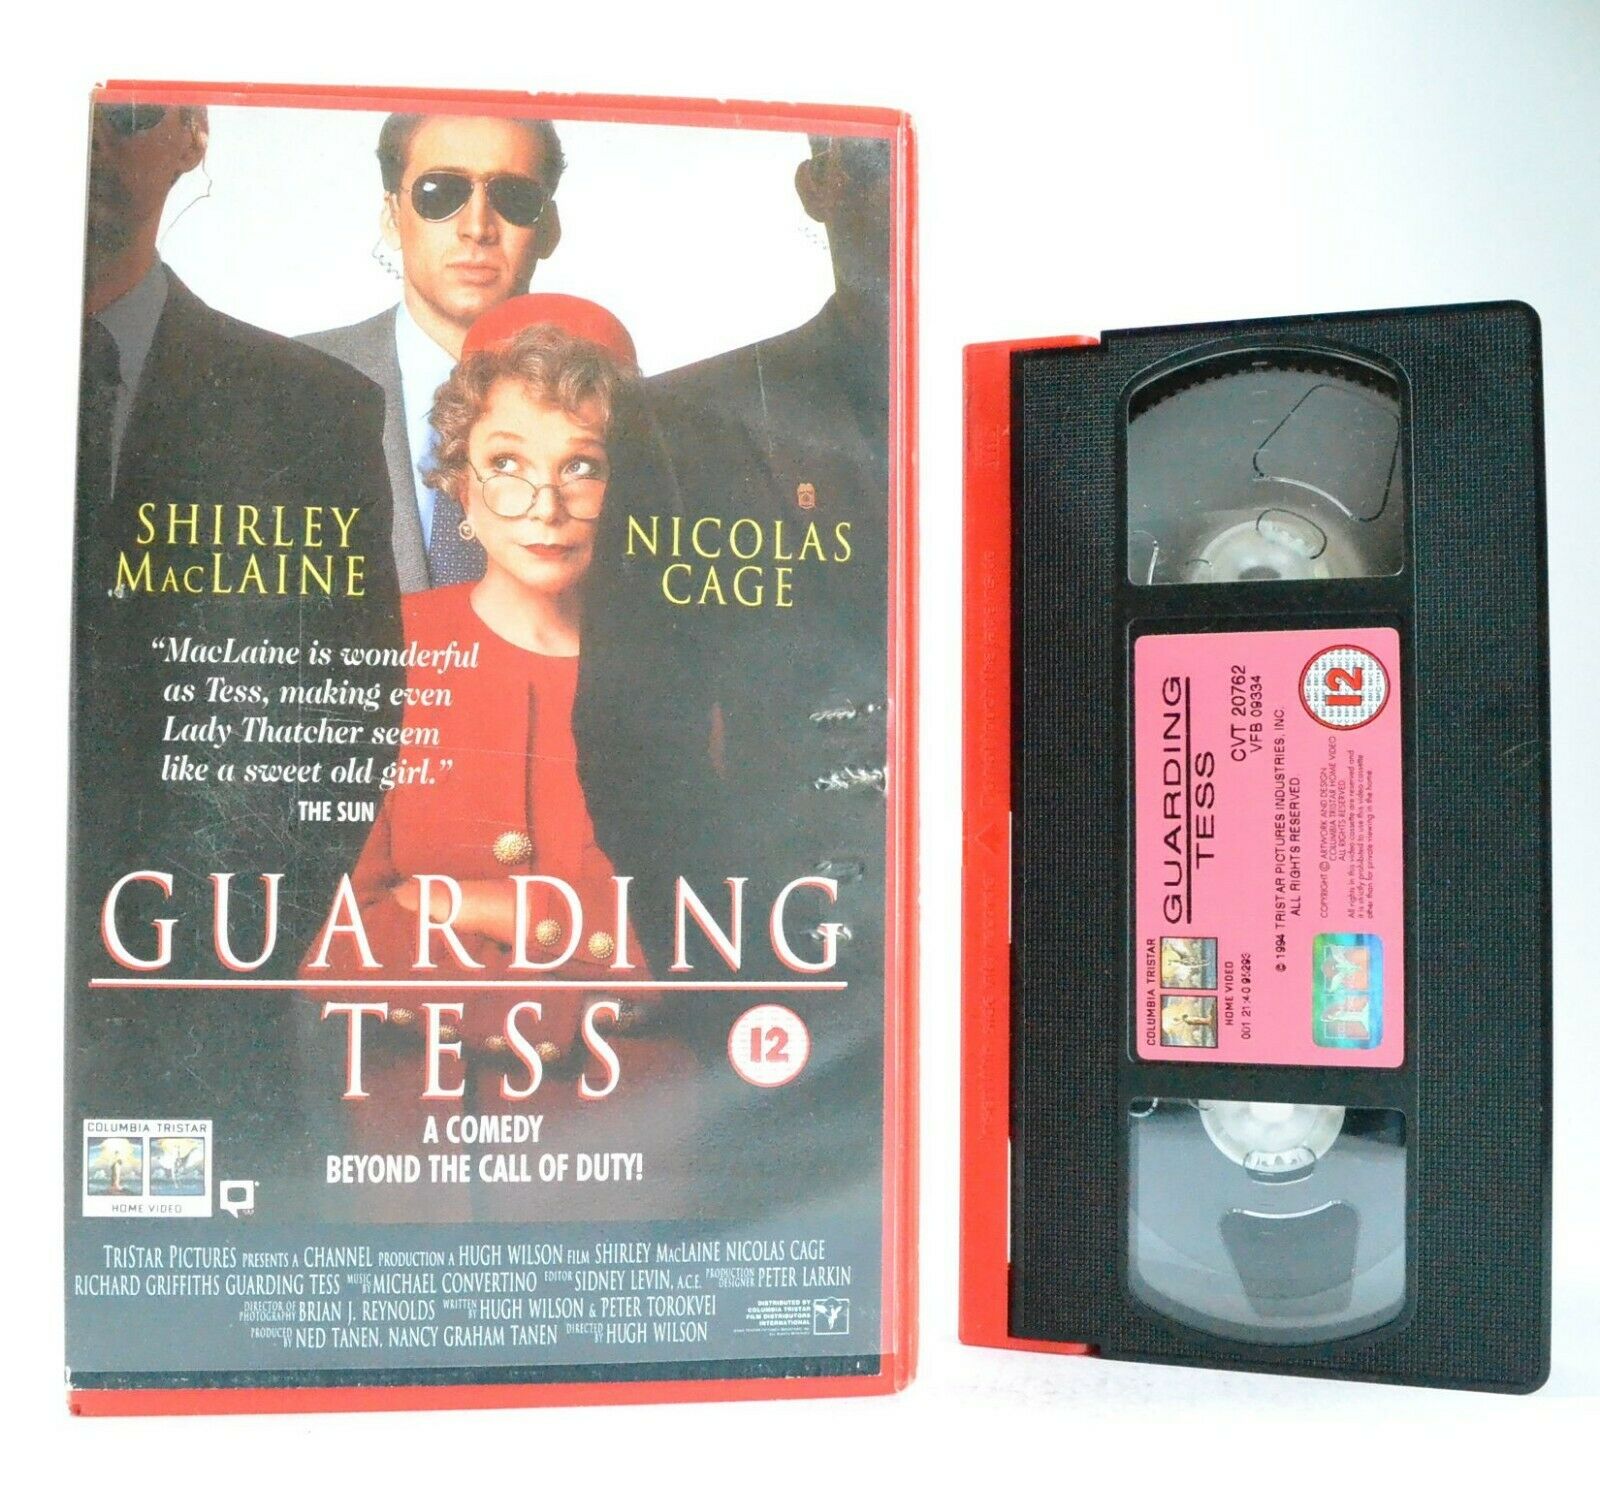 Guarding Tess: Columbia (1994) - Comedy - Large Box - S.MacLaine/N.Cage - VHS-